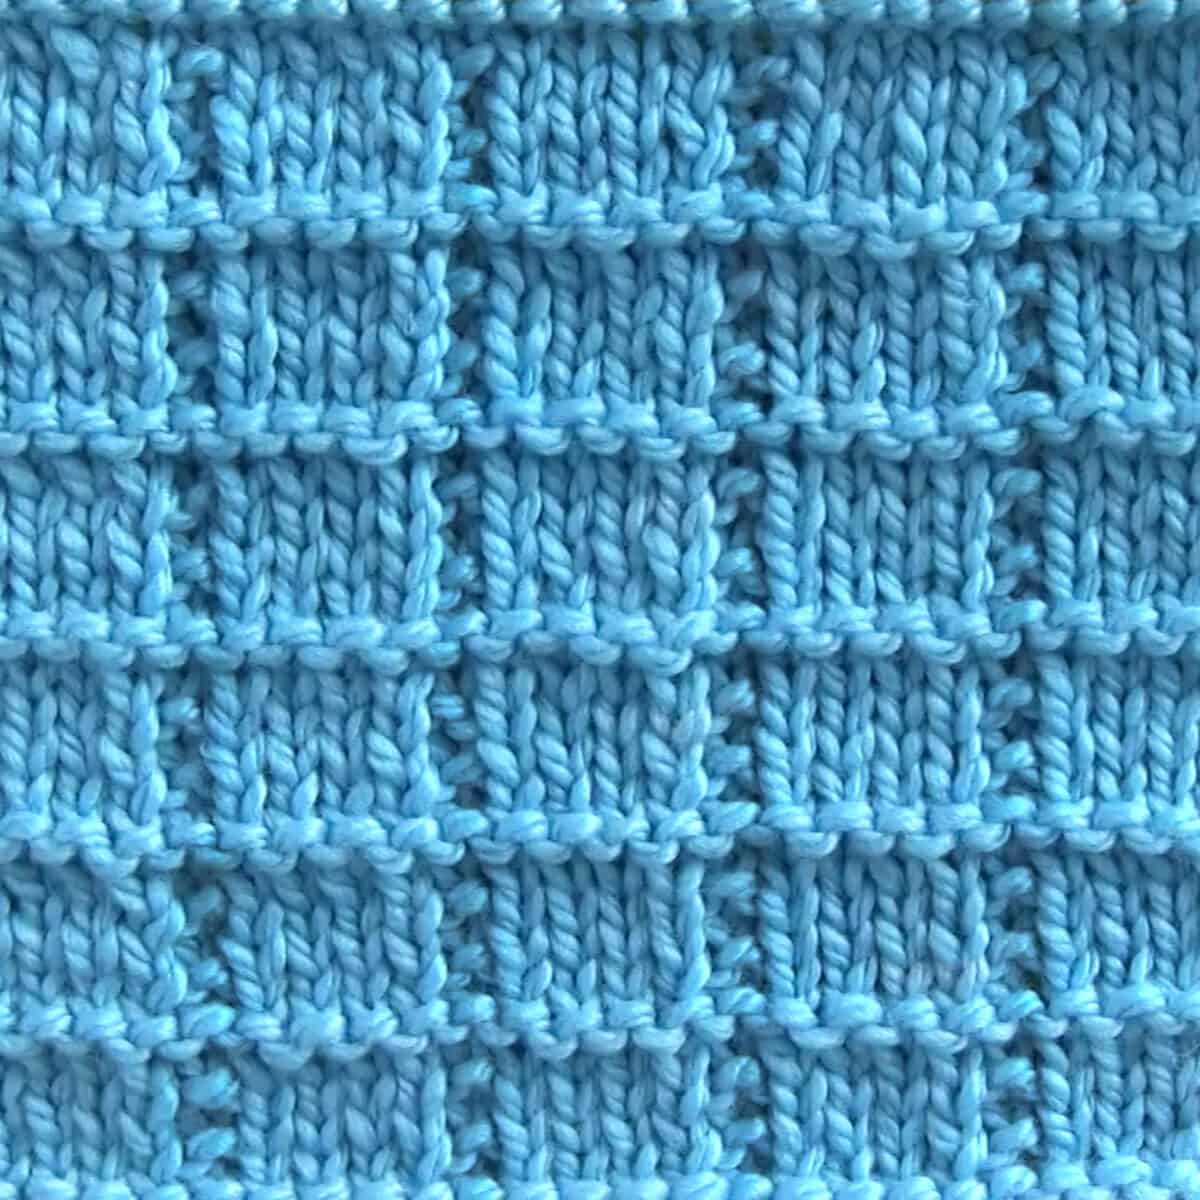 Knitted swatch in Tile Squares texture with blue colored yarn.